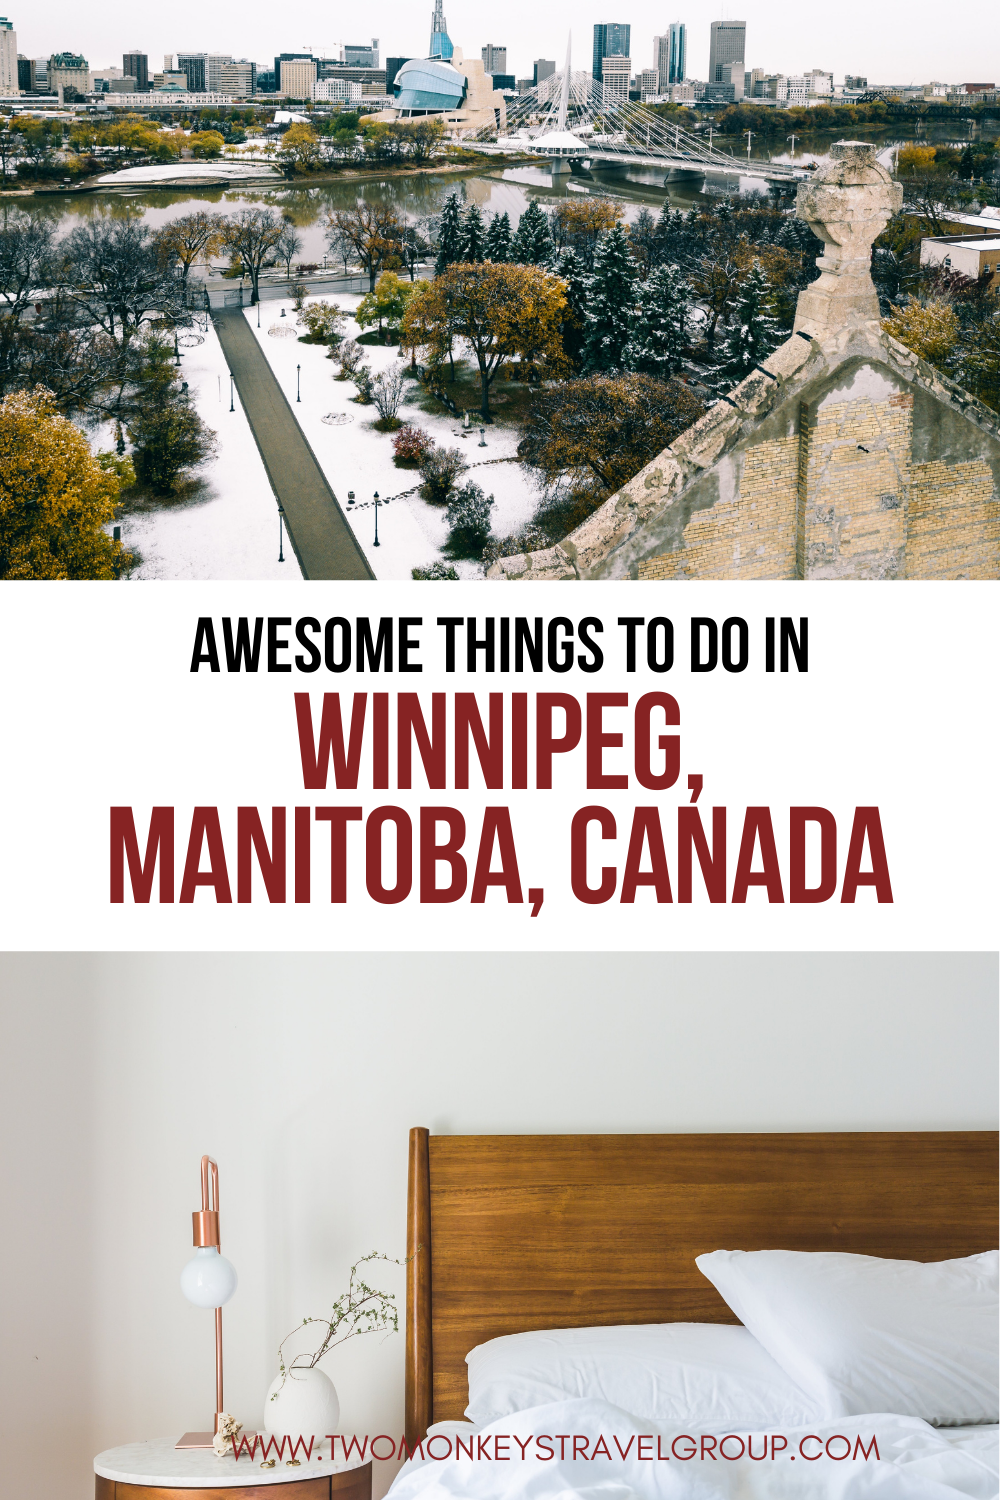 7 Awesome Things To Do in Winnipeg, Manitoba, Canada8